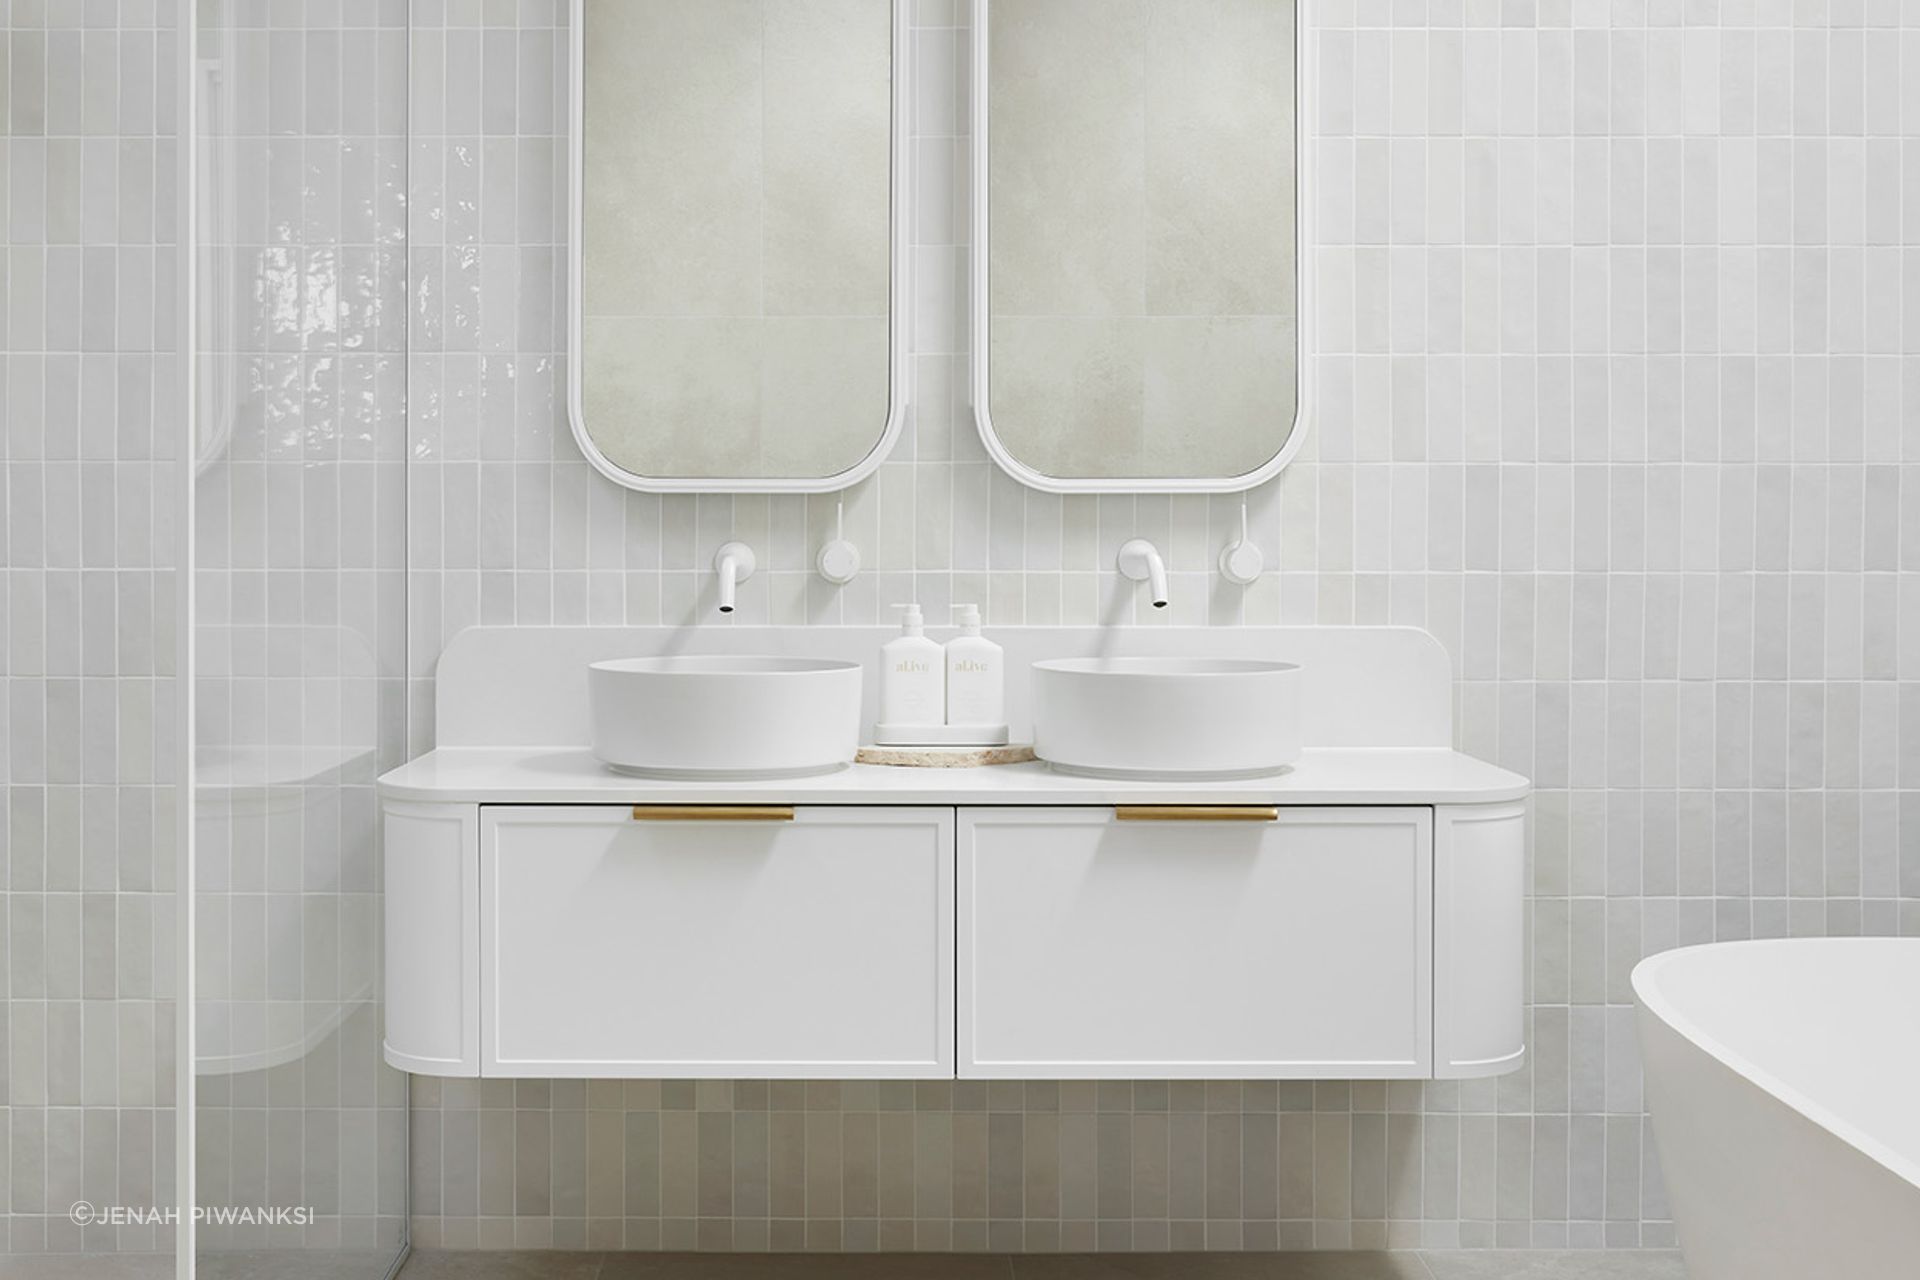 Flo Double Bowl, Ultra White, Brushed Brass handles.  Quinn Mirrored Cabinets in Ultra White. Bathroom designed by Alisa &amp; Lysandra for the Design Duo Series.